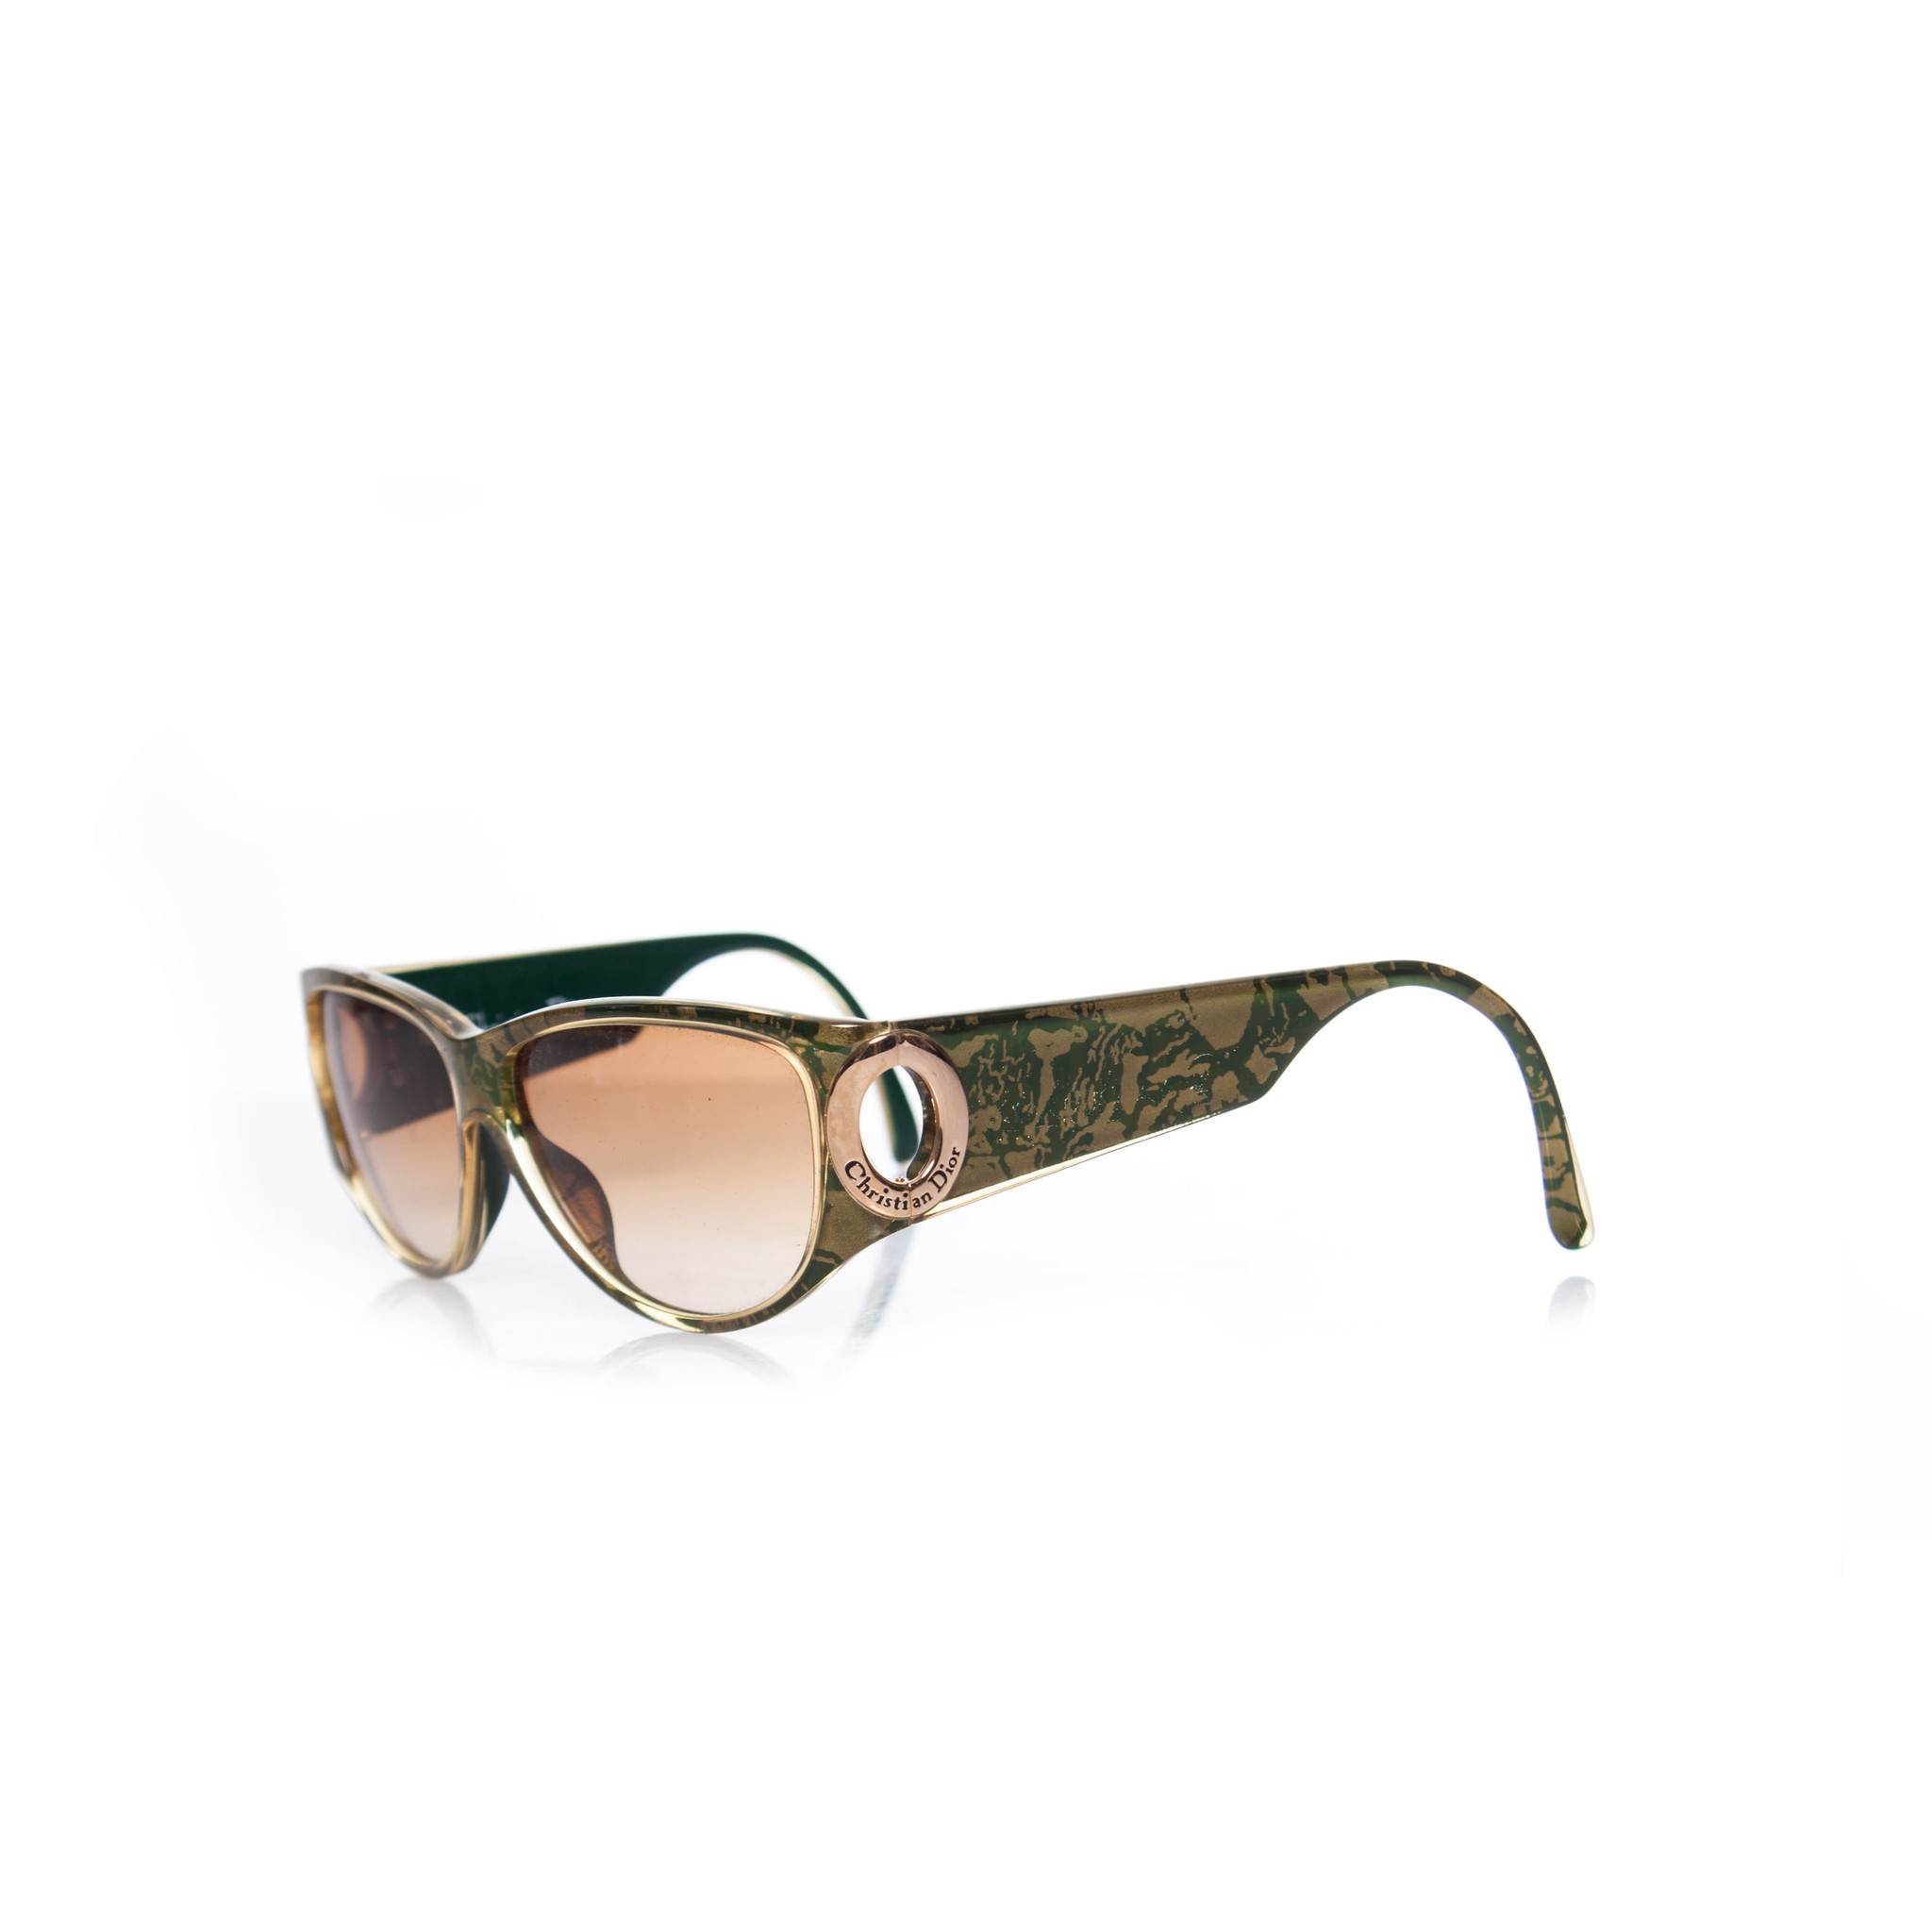 Christian Dior, Vintage sunglasses in green and gold. - Unique